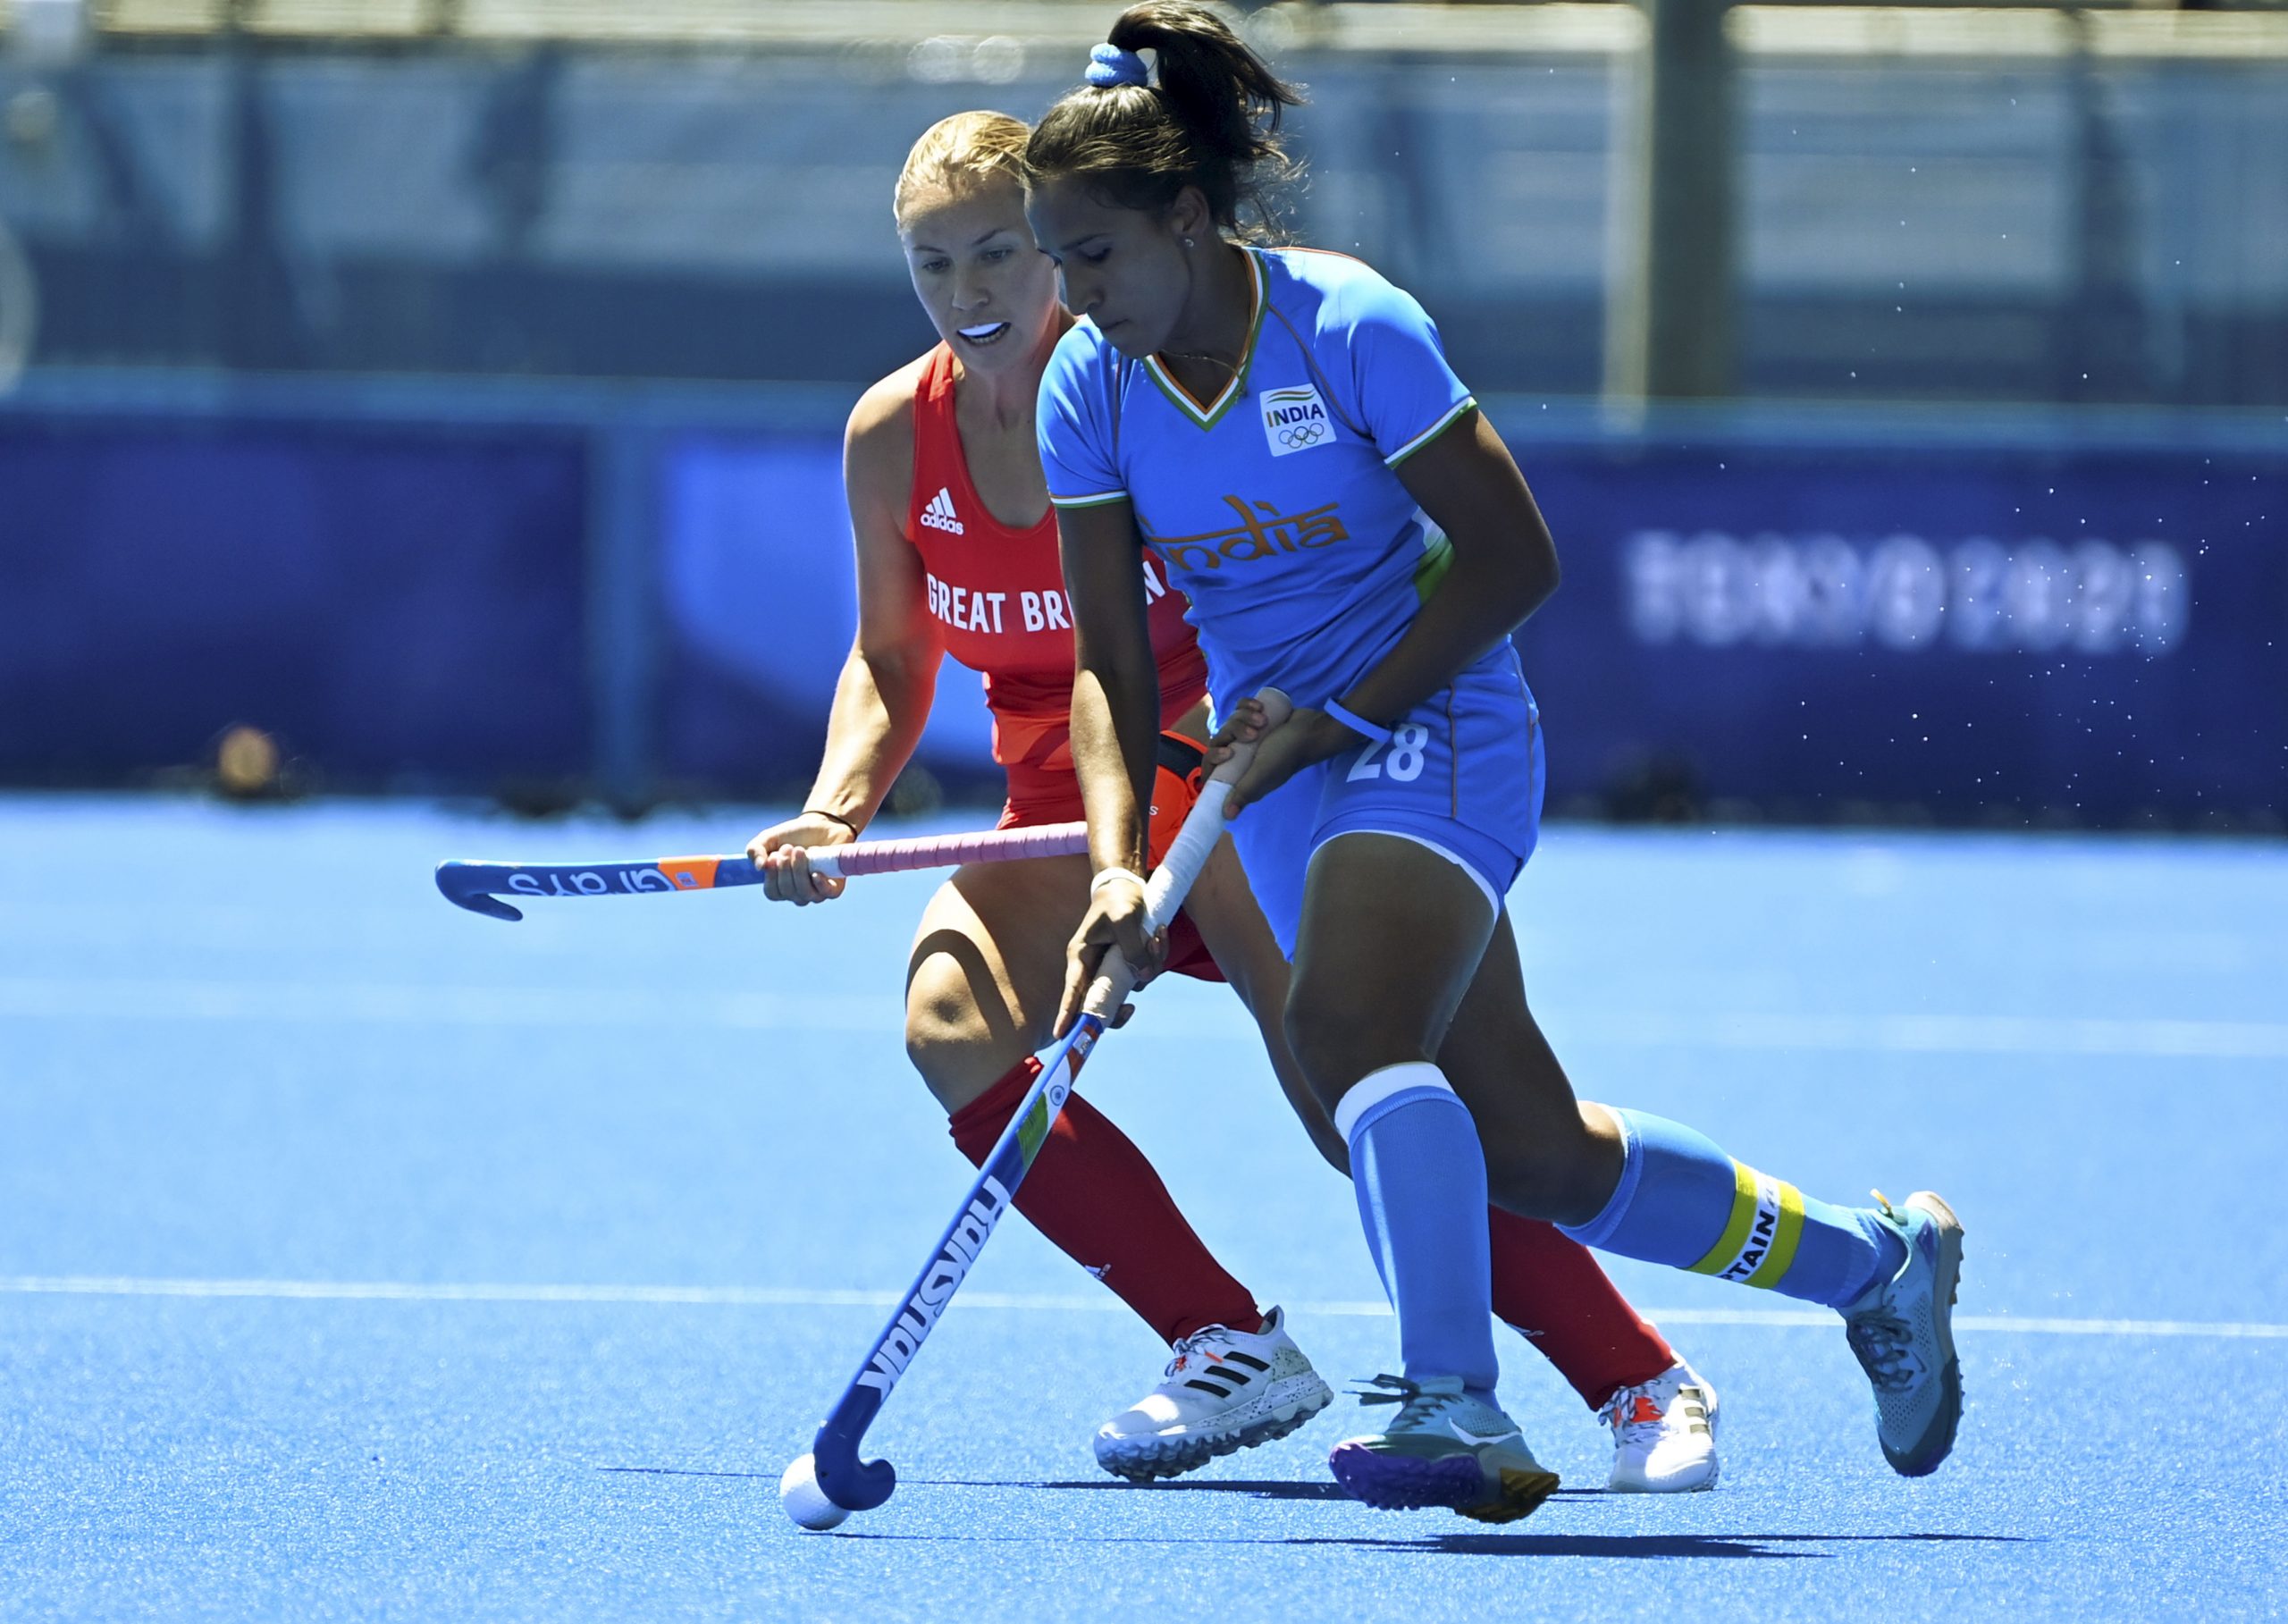 Hurting but proud: Hockey captain Rani Rampal says finishing 4th no mean feat